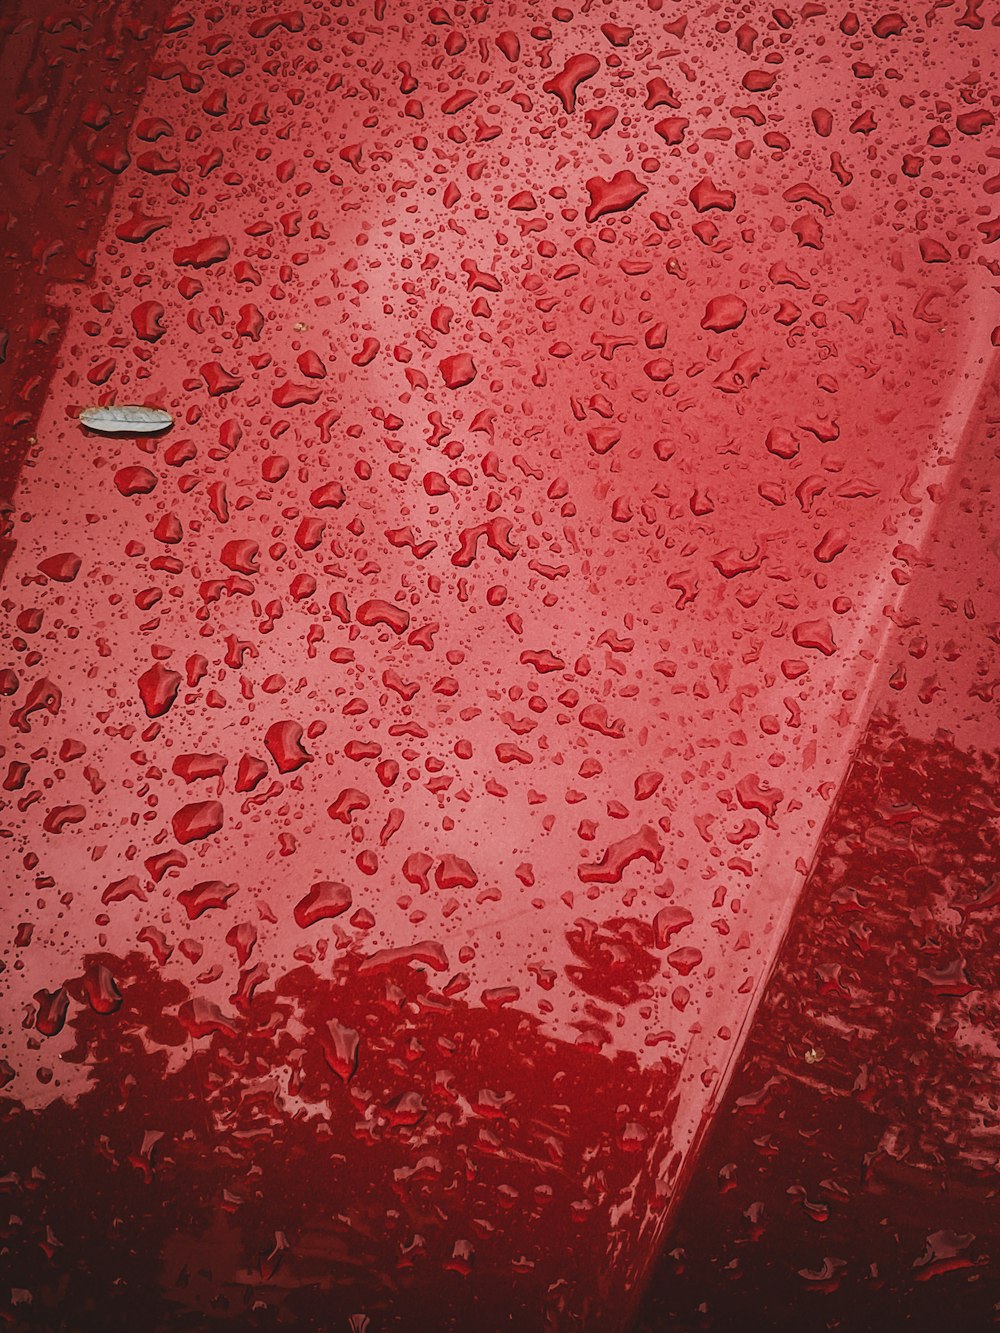 a red surface with water droplets